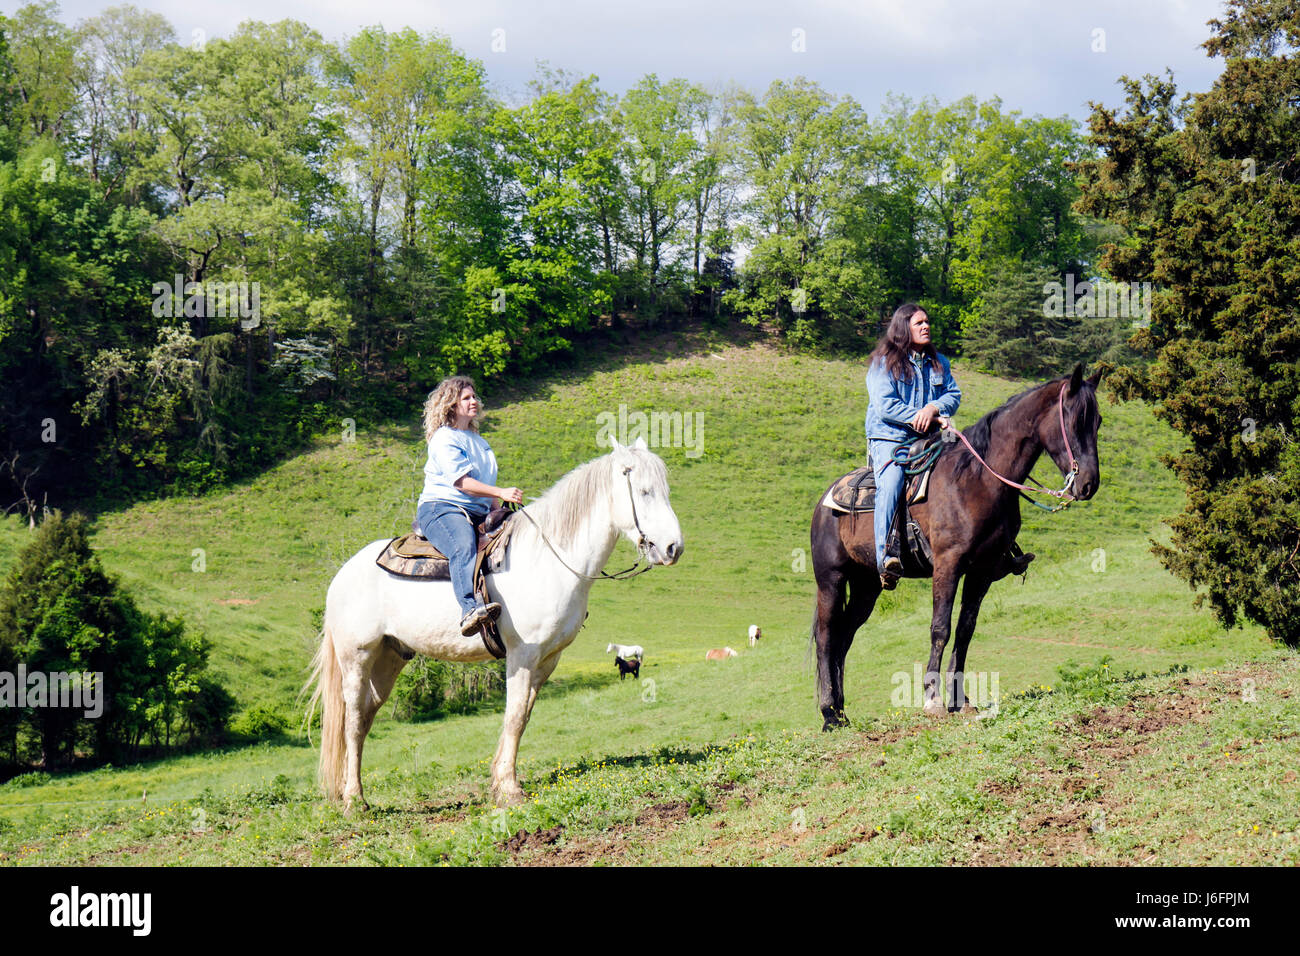 Sevierville Tennessee,Smoky Mountains,Five Oaks Riding Stables,horseback riding,woman female women,Native American,man,trail guide,horse,animal,equest Stock Photo